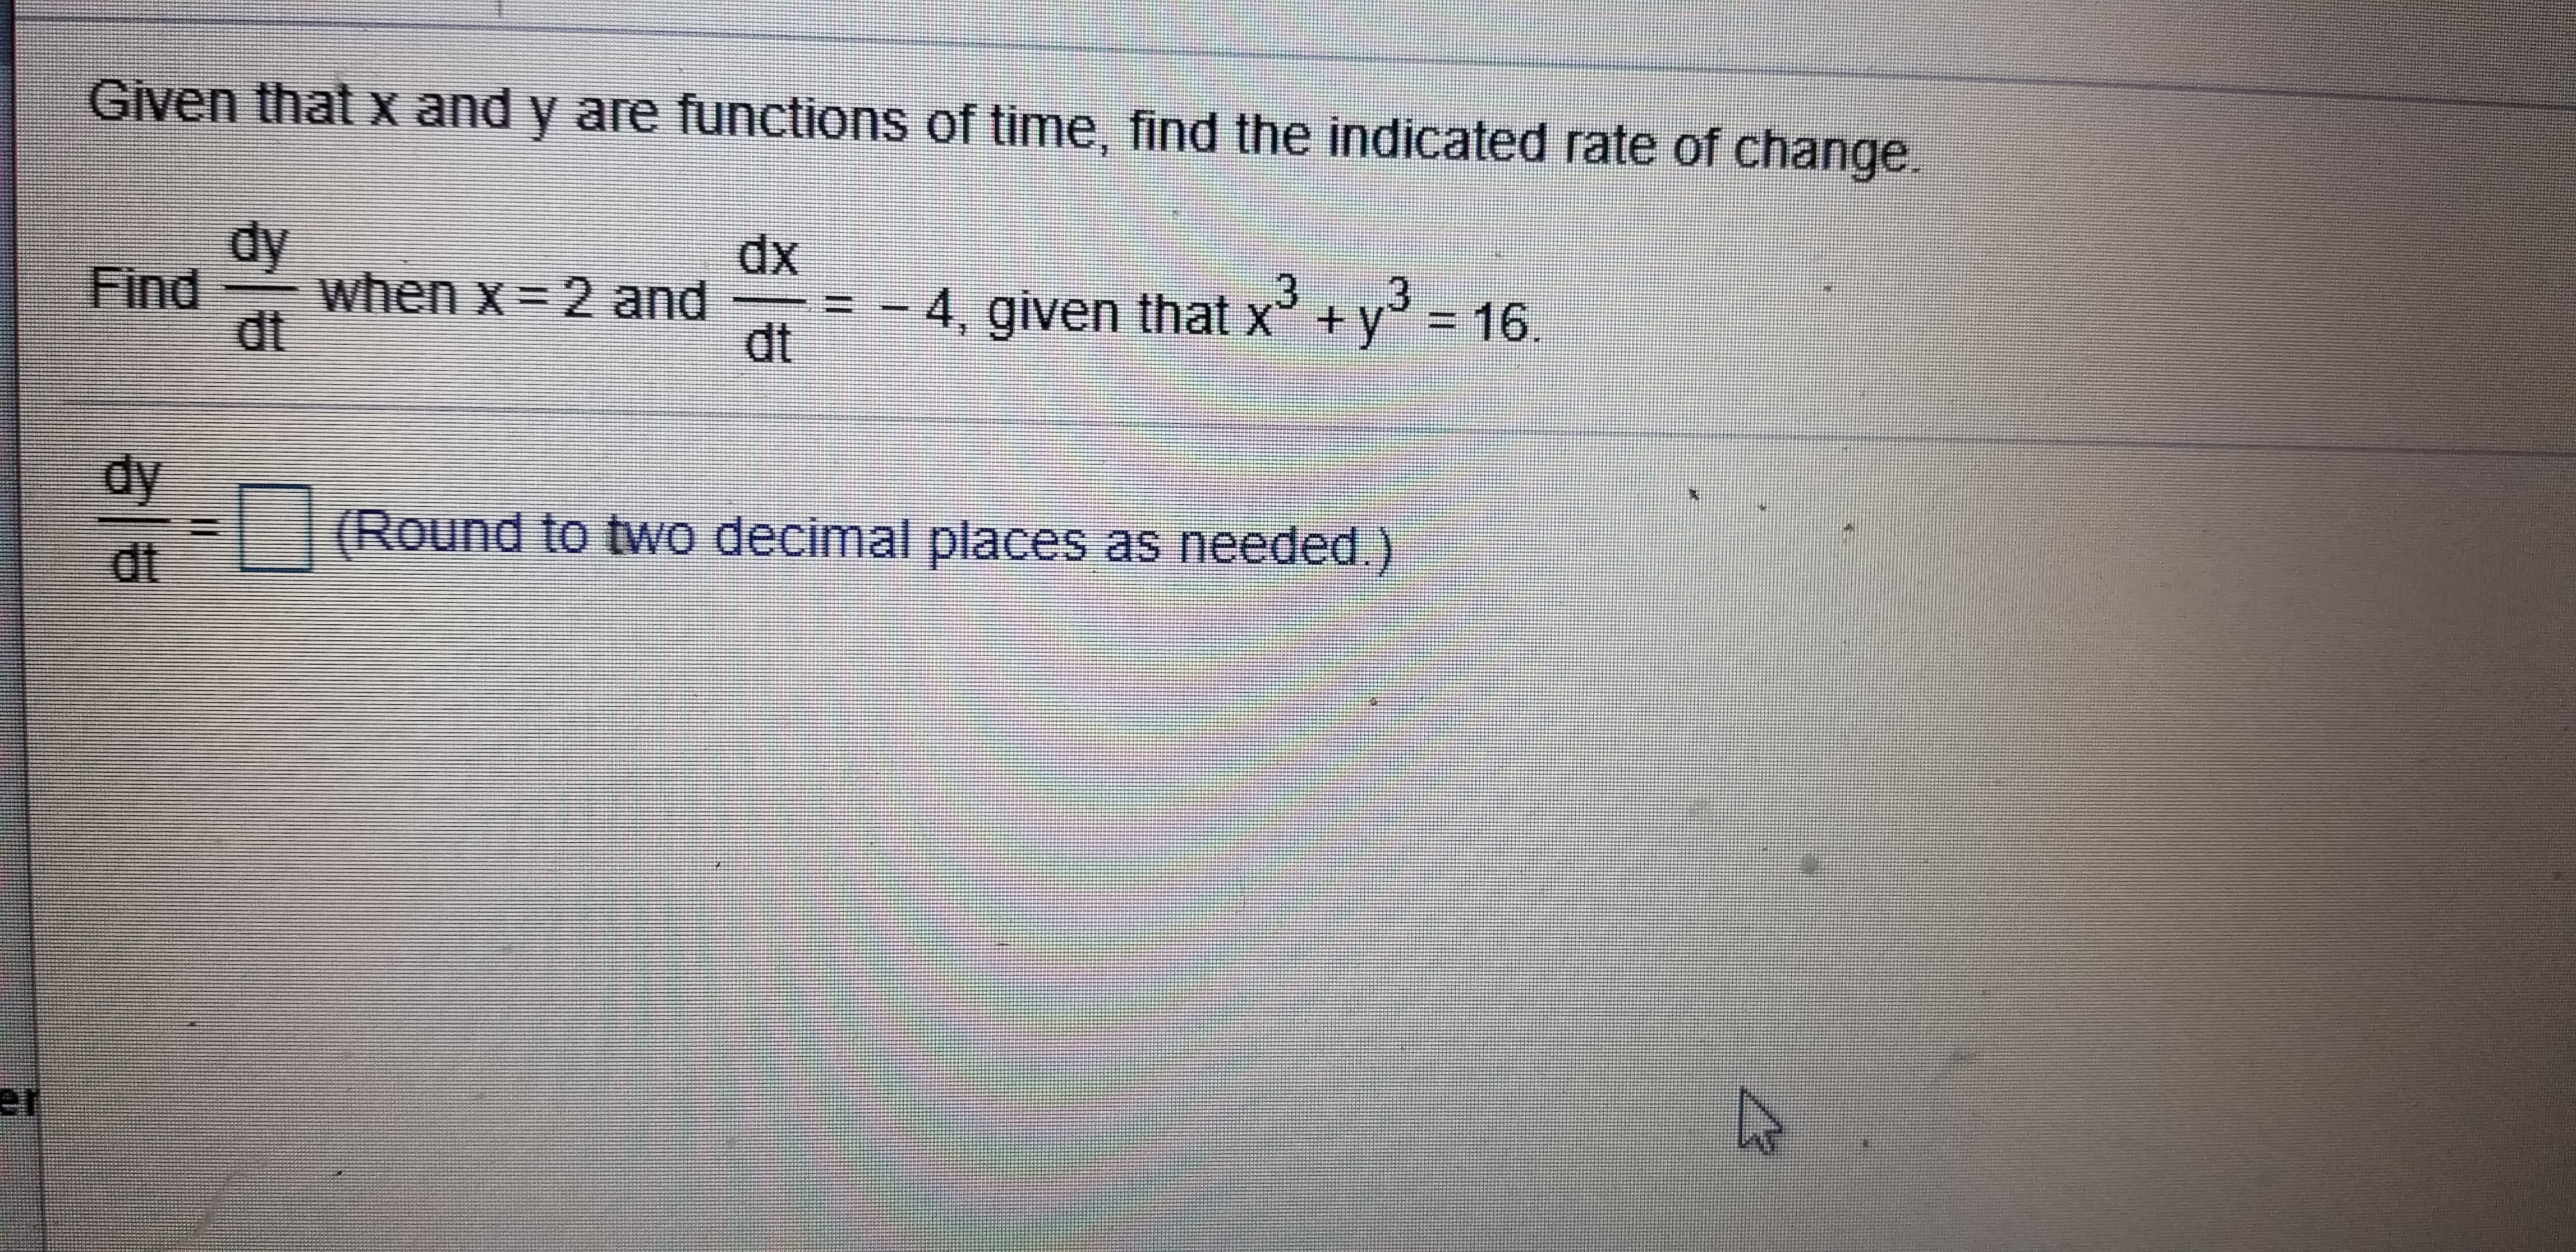 Given that x and y are functions of time, find the indicated rate of change.
dy
when x 2 and
dt
dx
Find
3
y = 16.
-4, given that x +
dt
dy
(Round to two decimal places as needed)
dt
er
